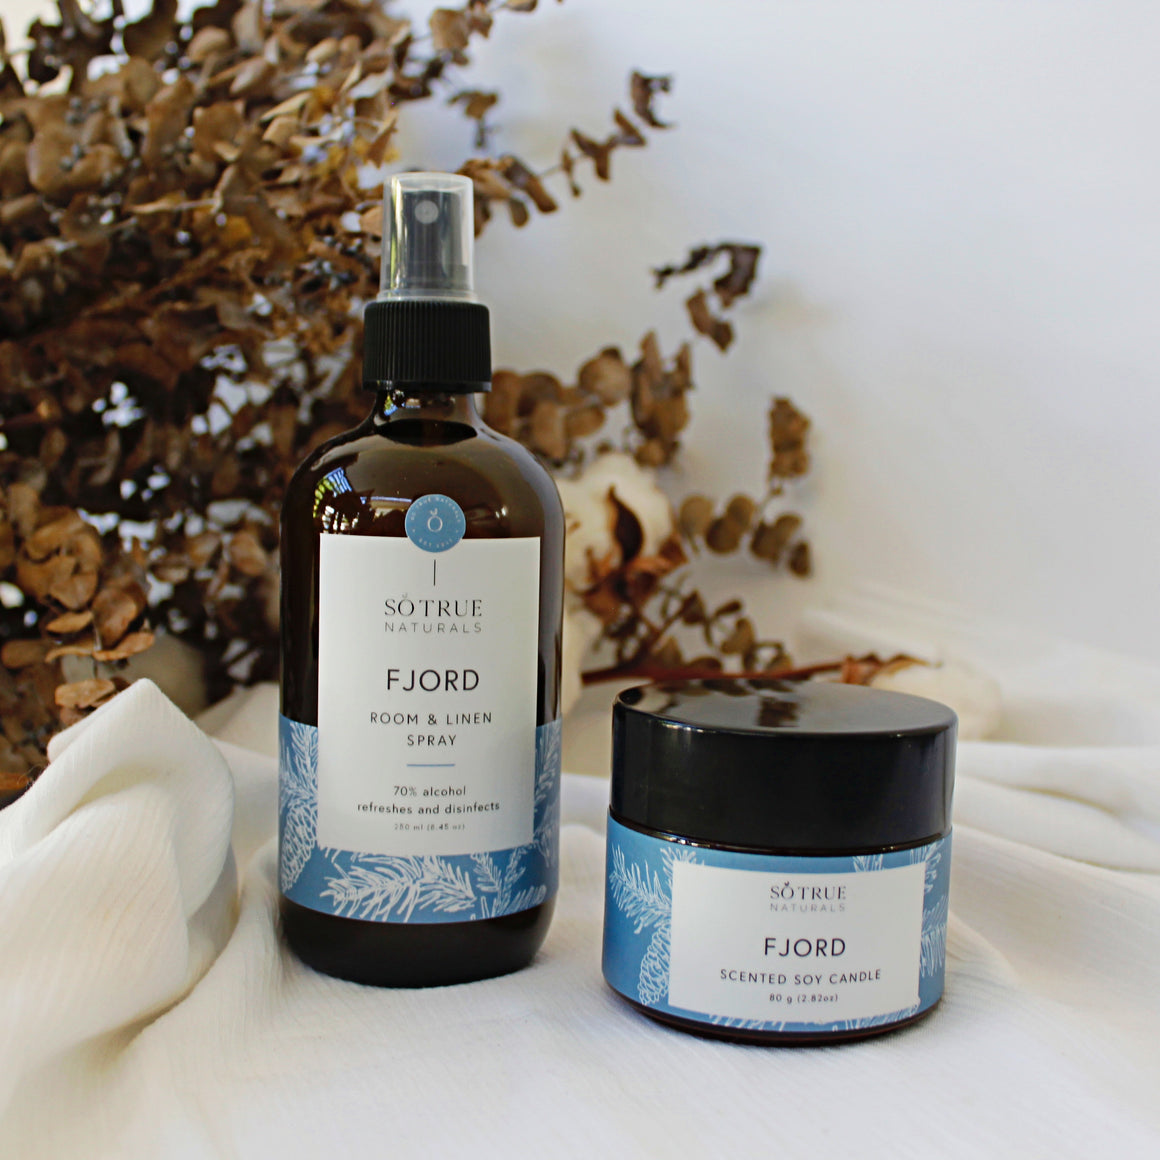 Room & Linen Spray and Soy Candle Set - Fjord